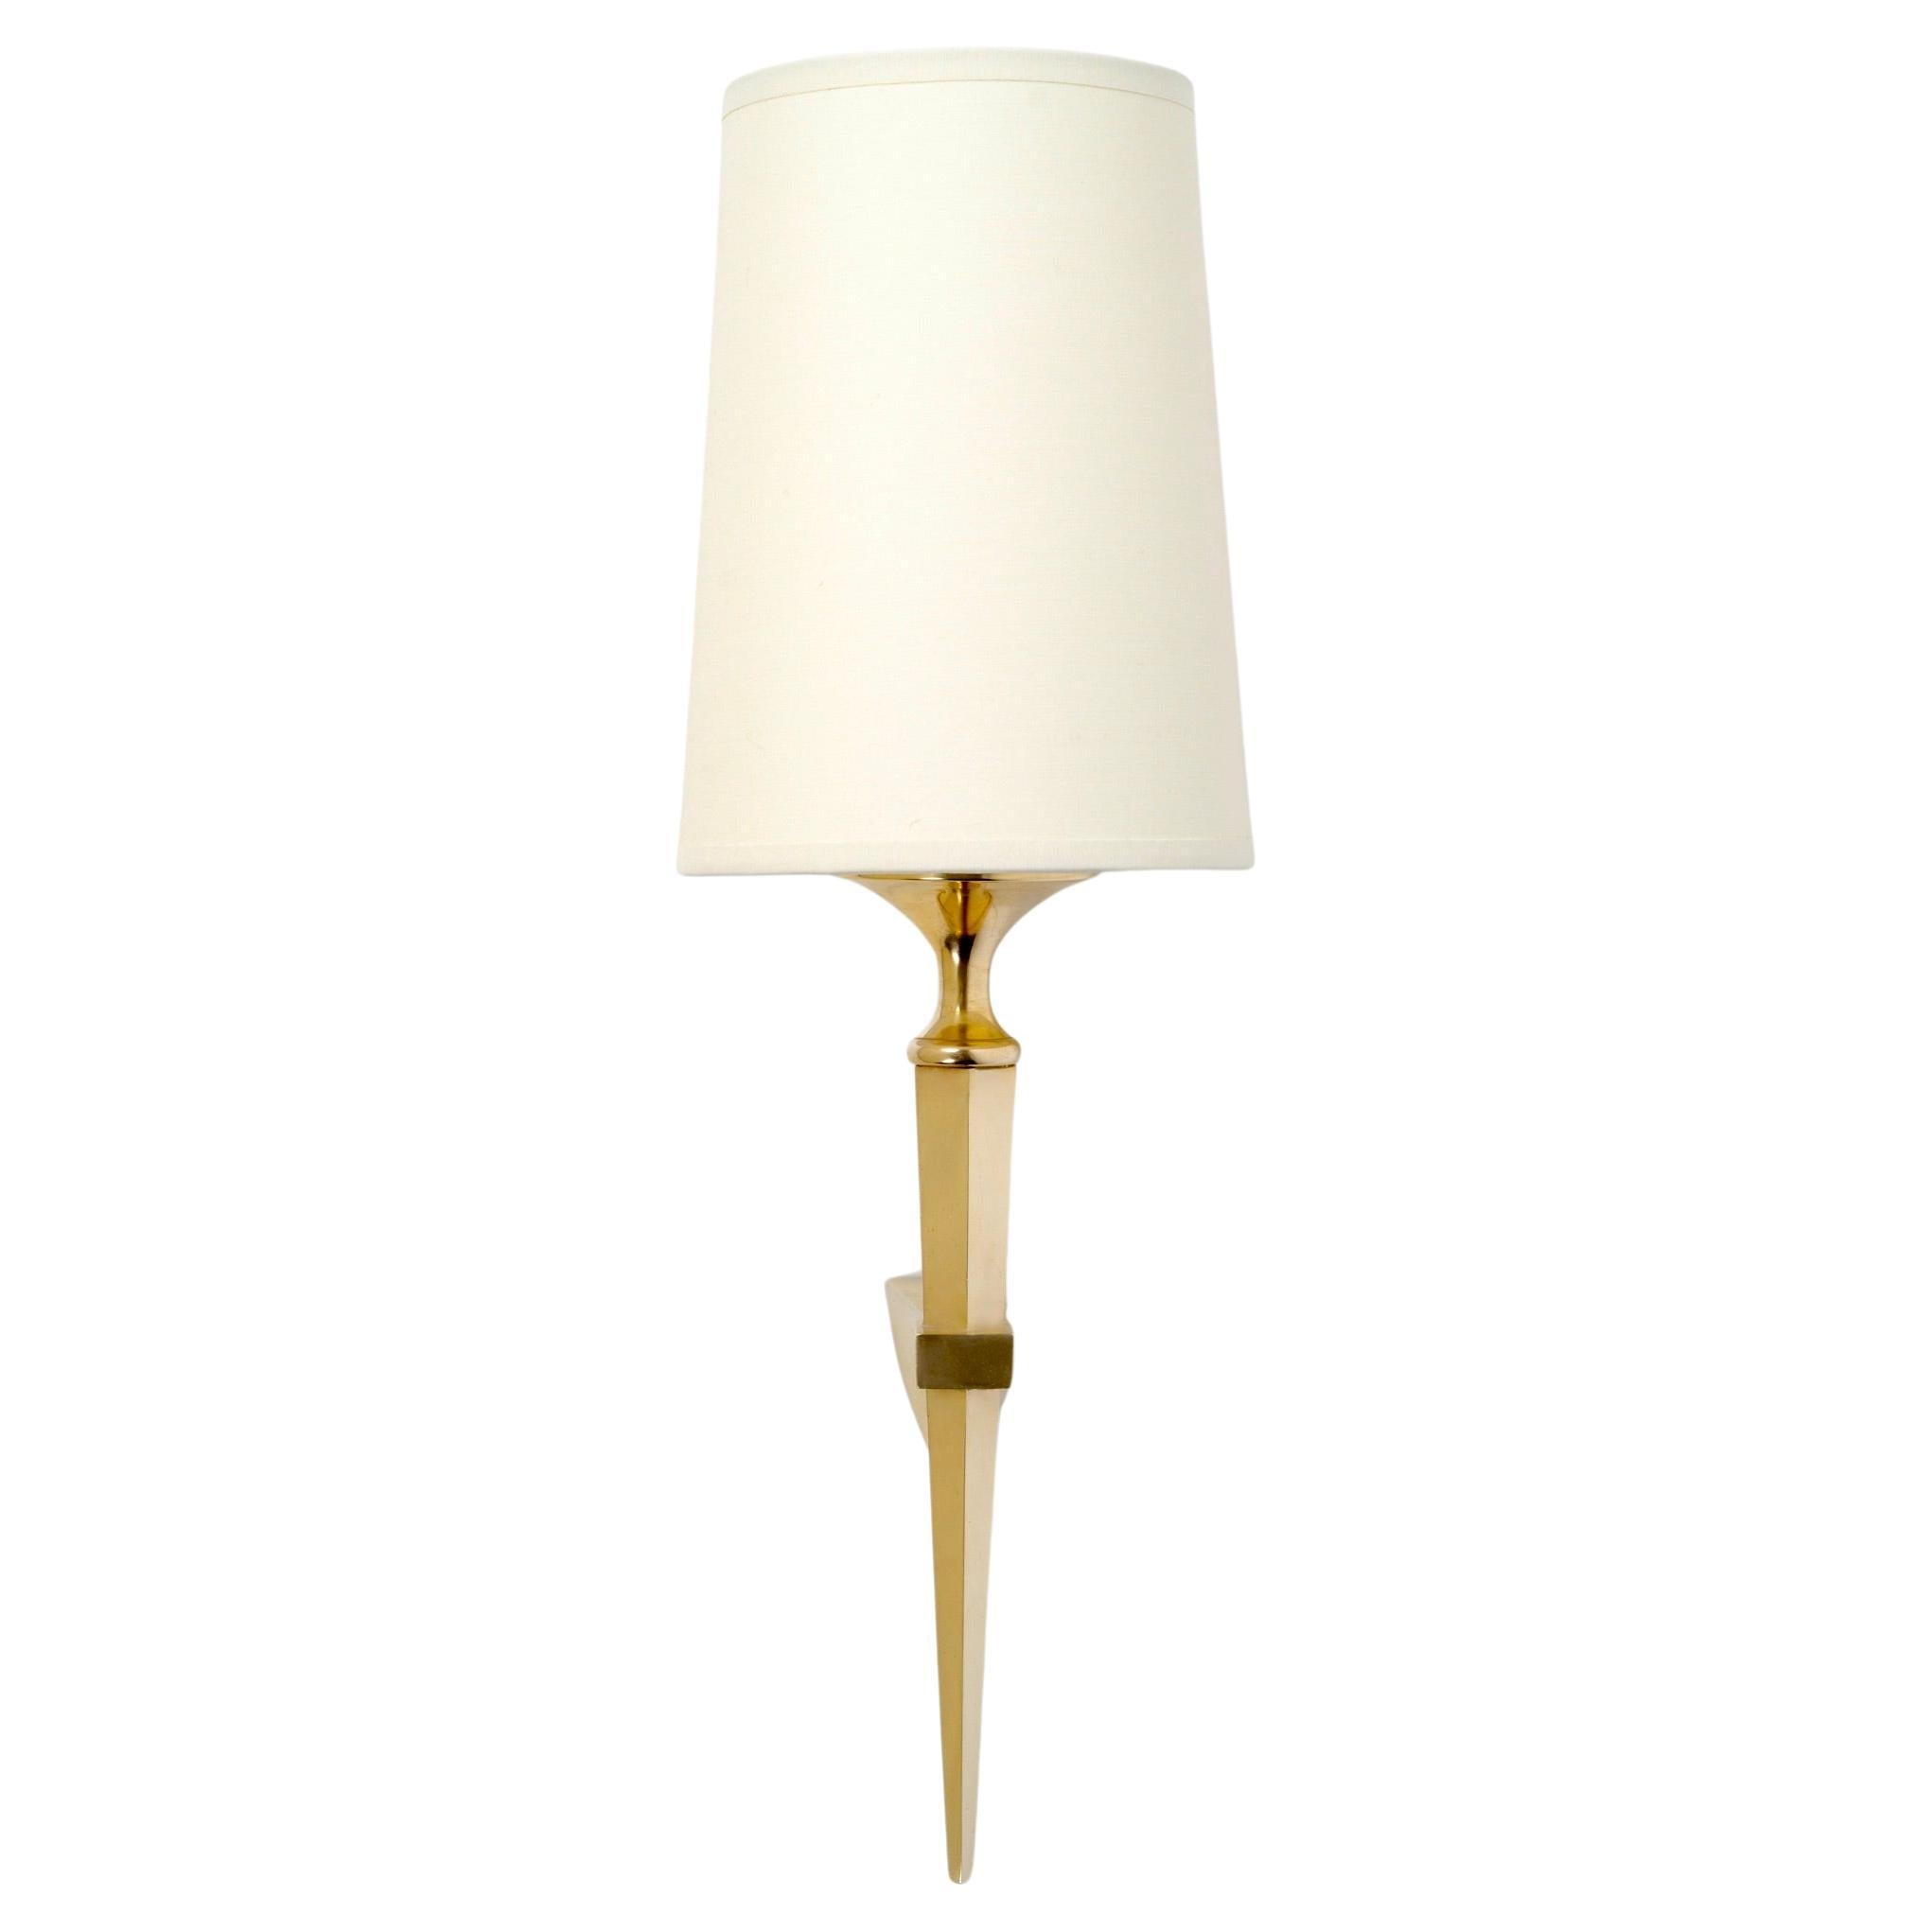 Composed of a wall support on which rests a faceted arm of light ending in a point on the lower part, all in gilded bronze.
The upper part is covered by a conical shade in off-white cotton, highlighted at the base by a gilded brass cup.
High-quality